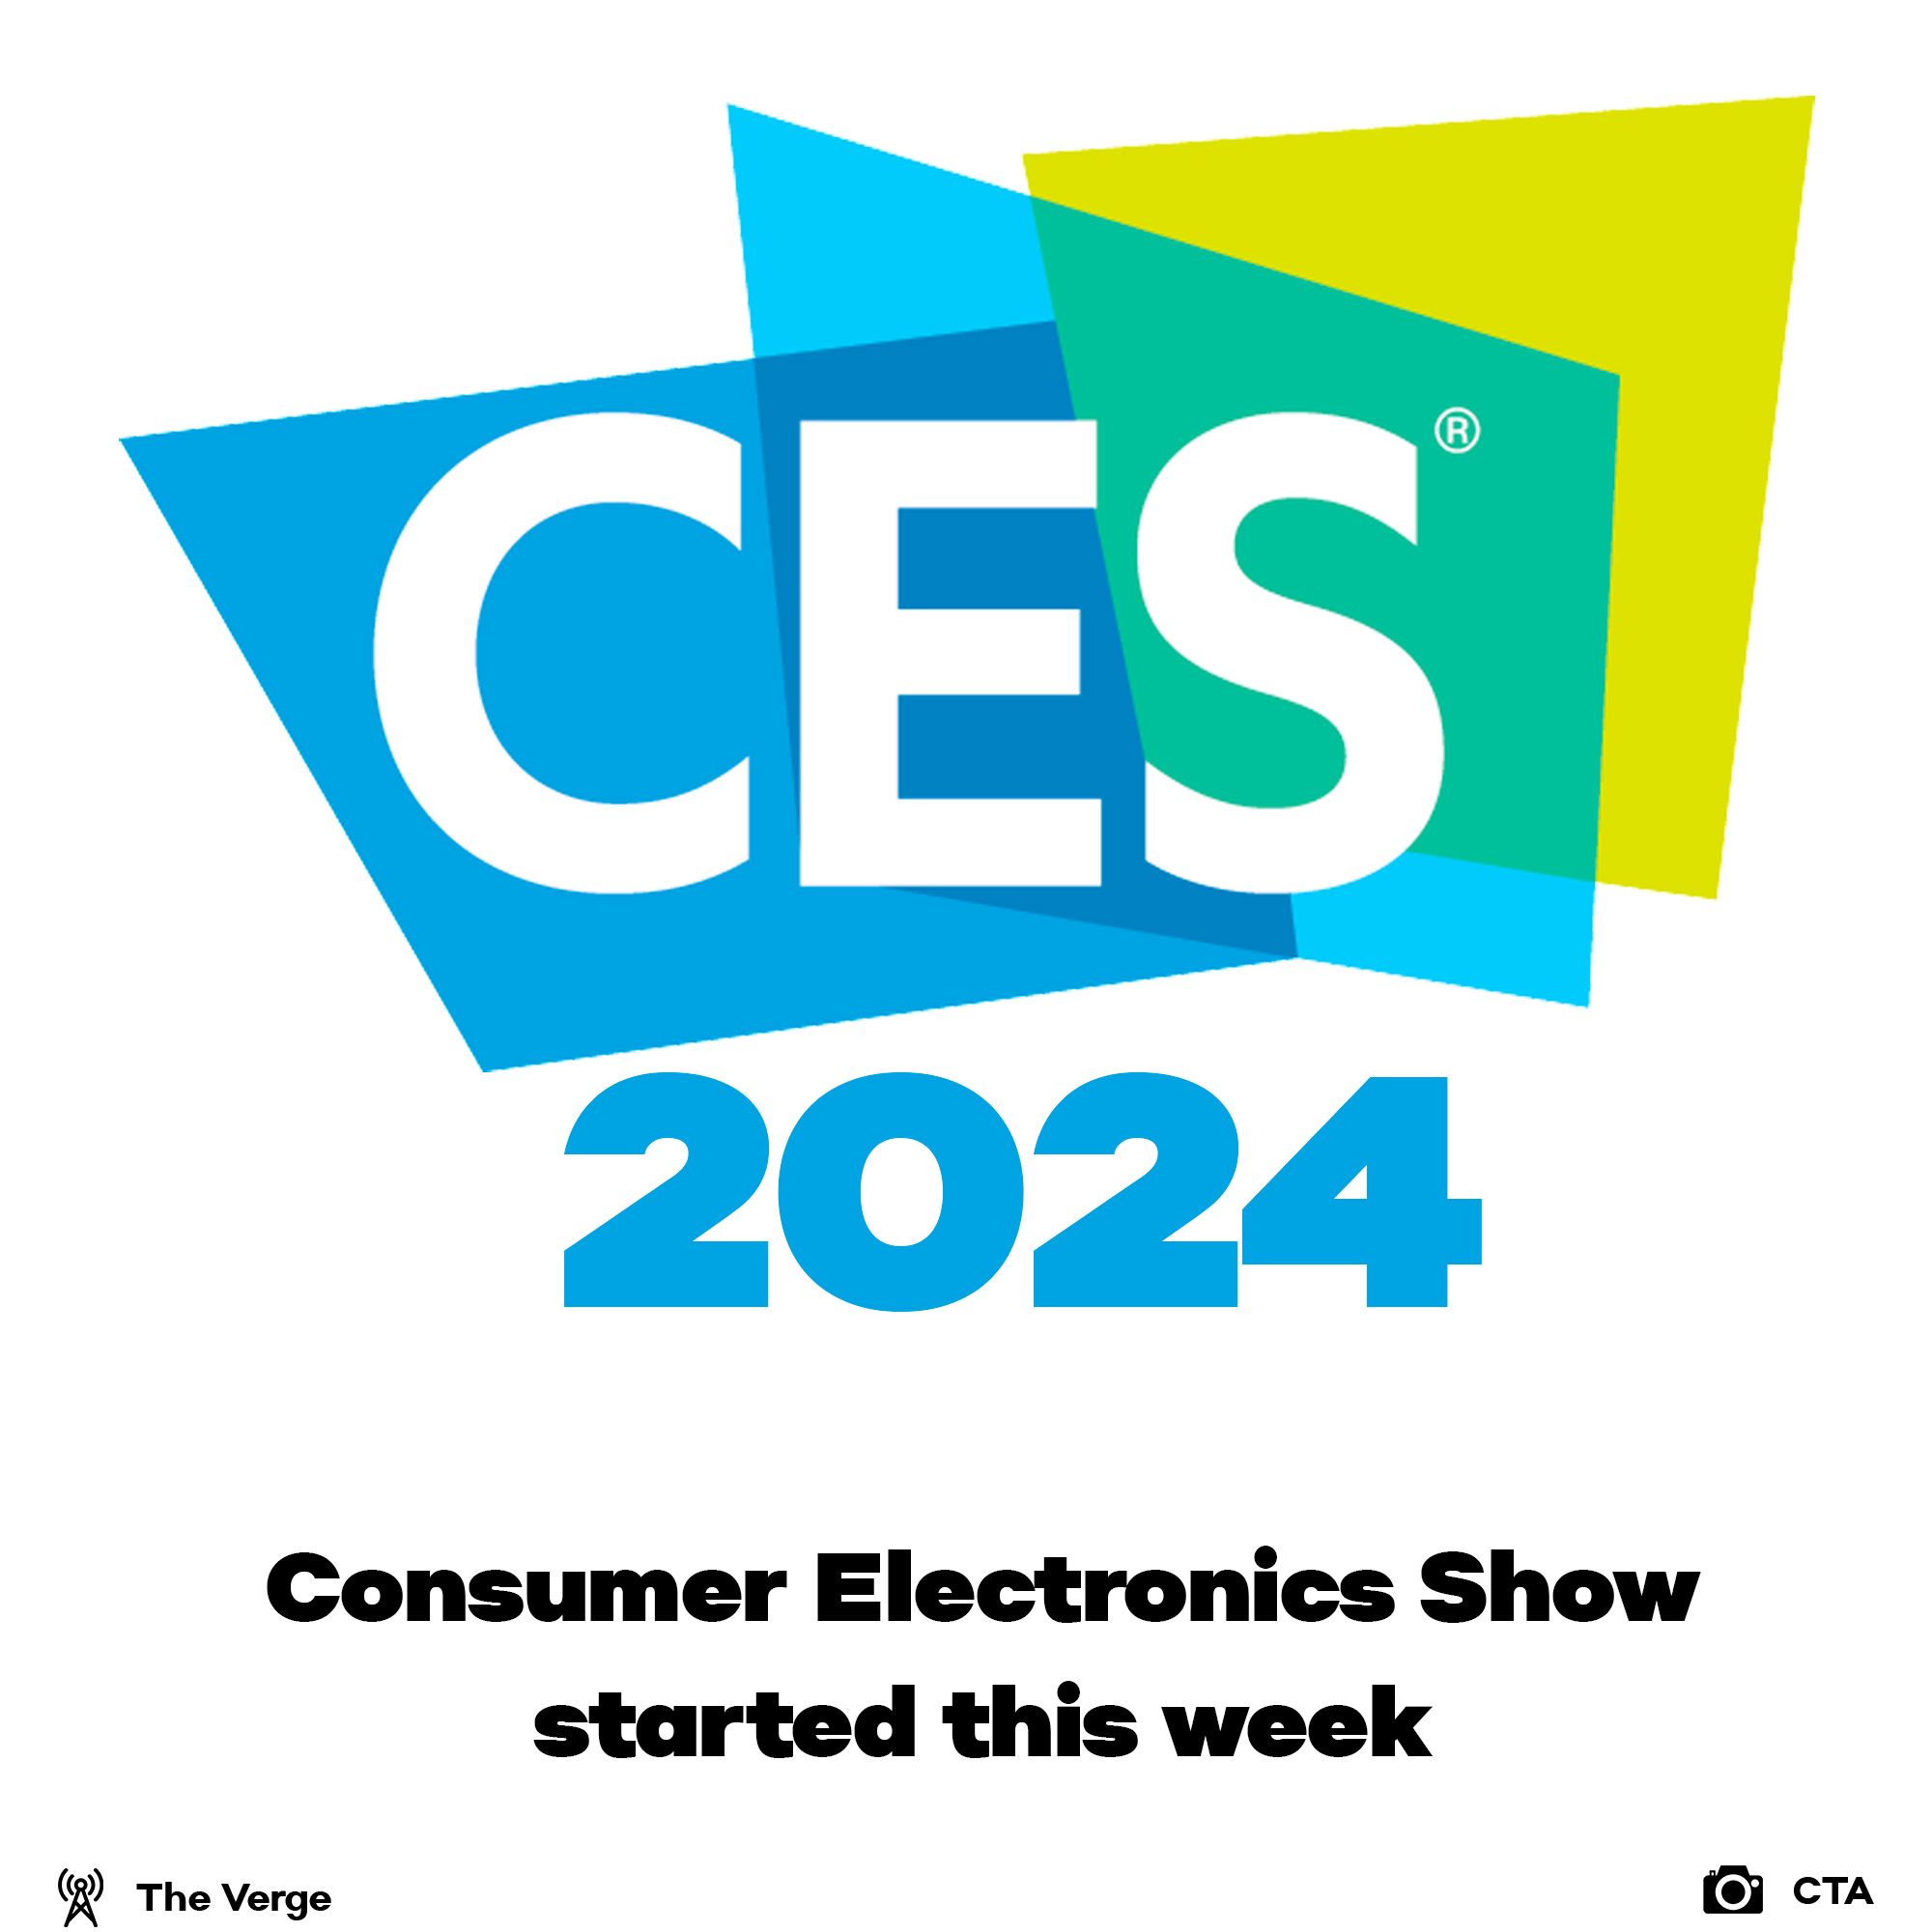 CES 2024 was this week